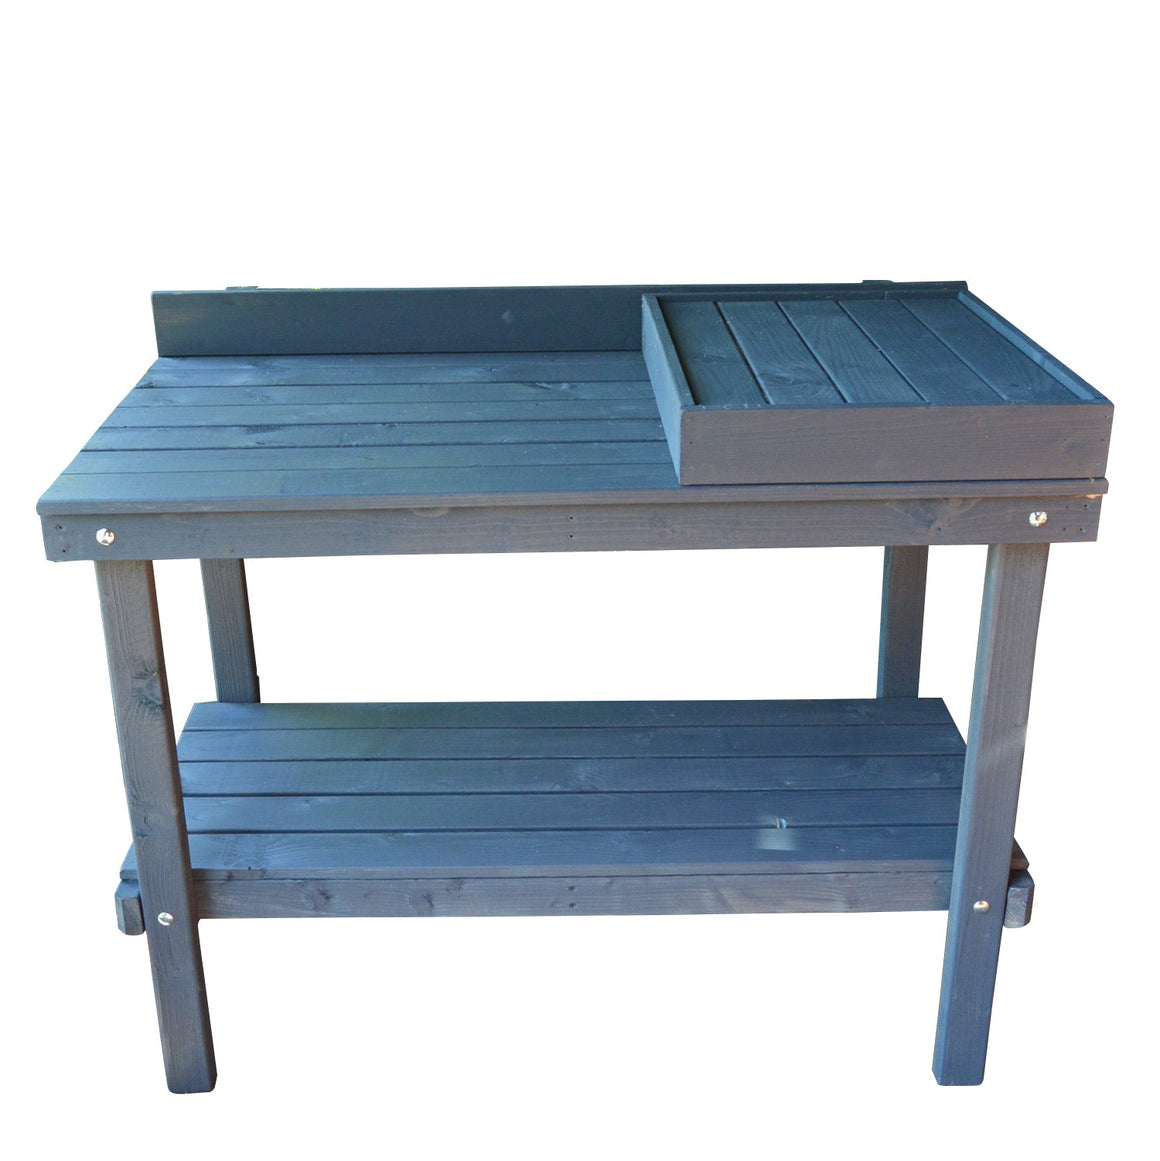 Strong outdoor pizza oven table for sale